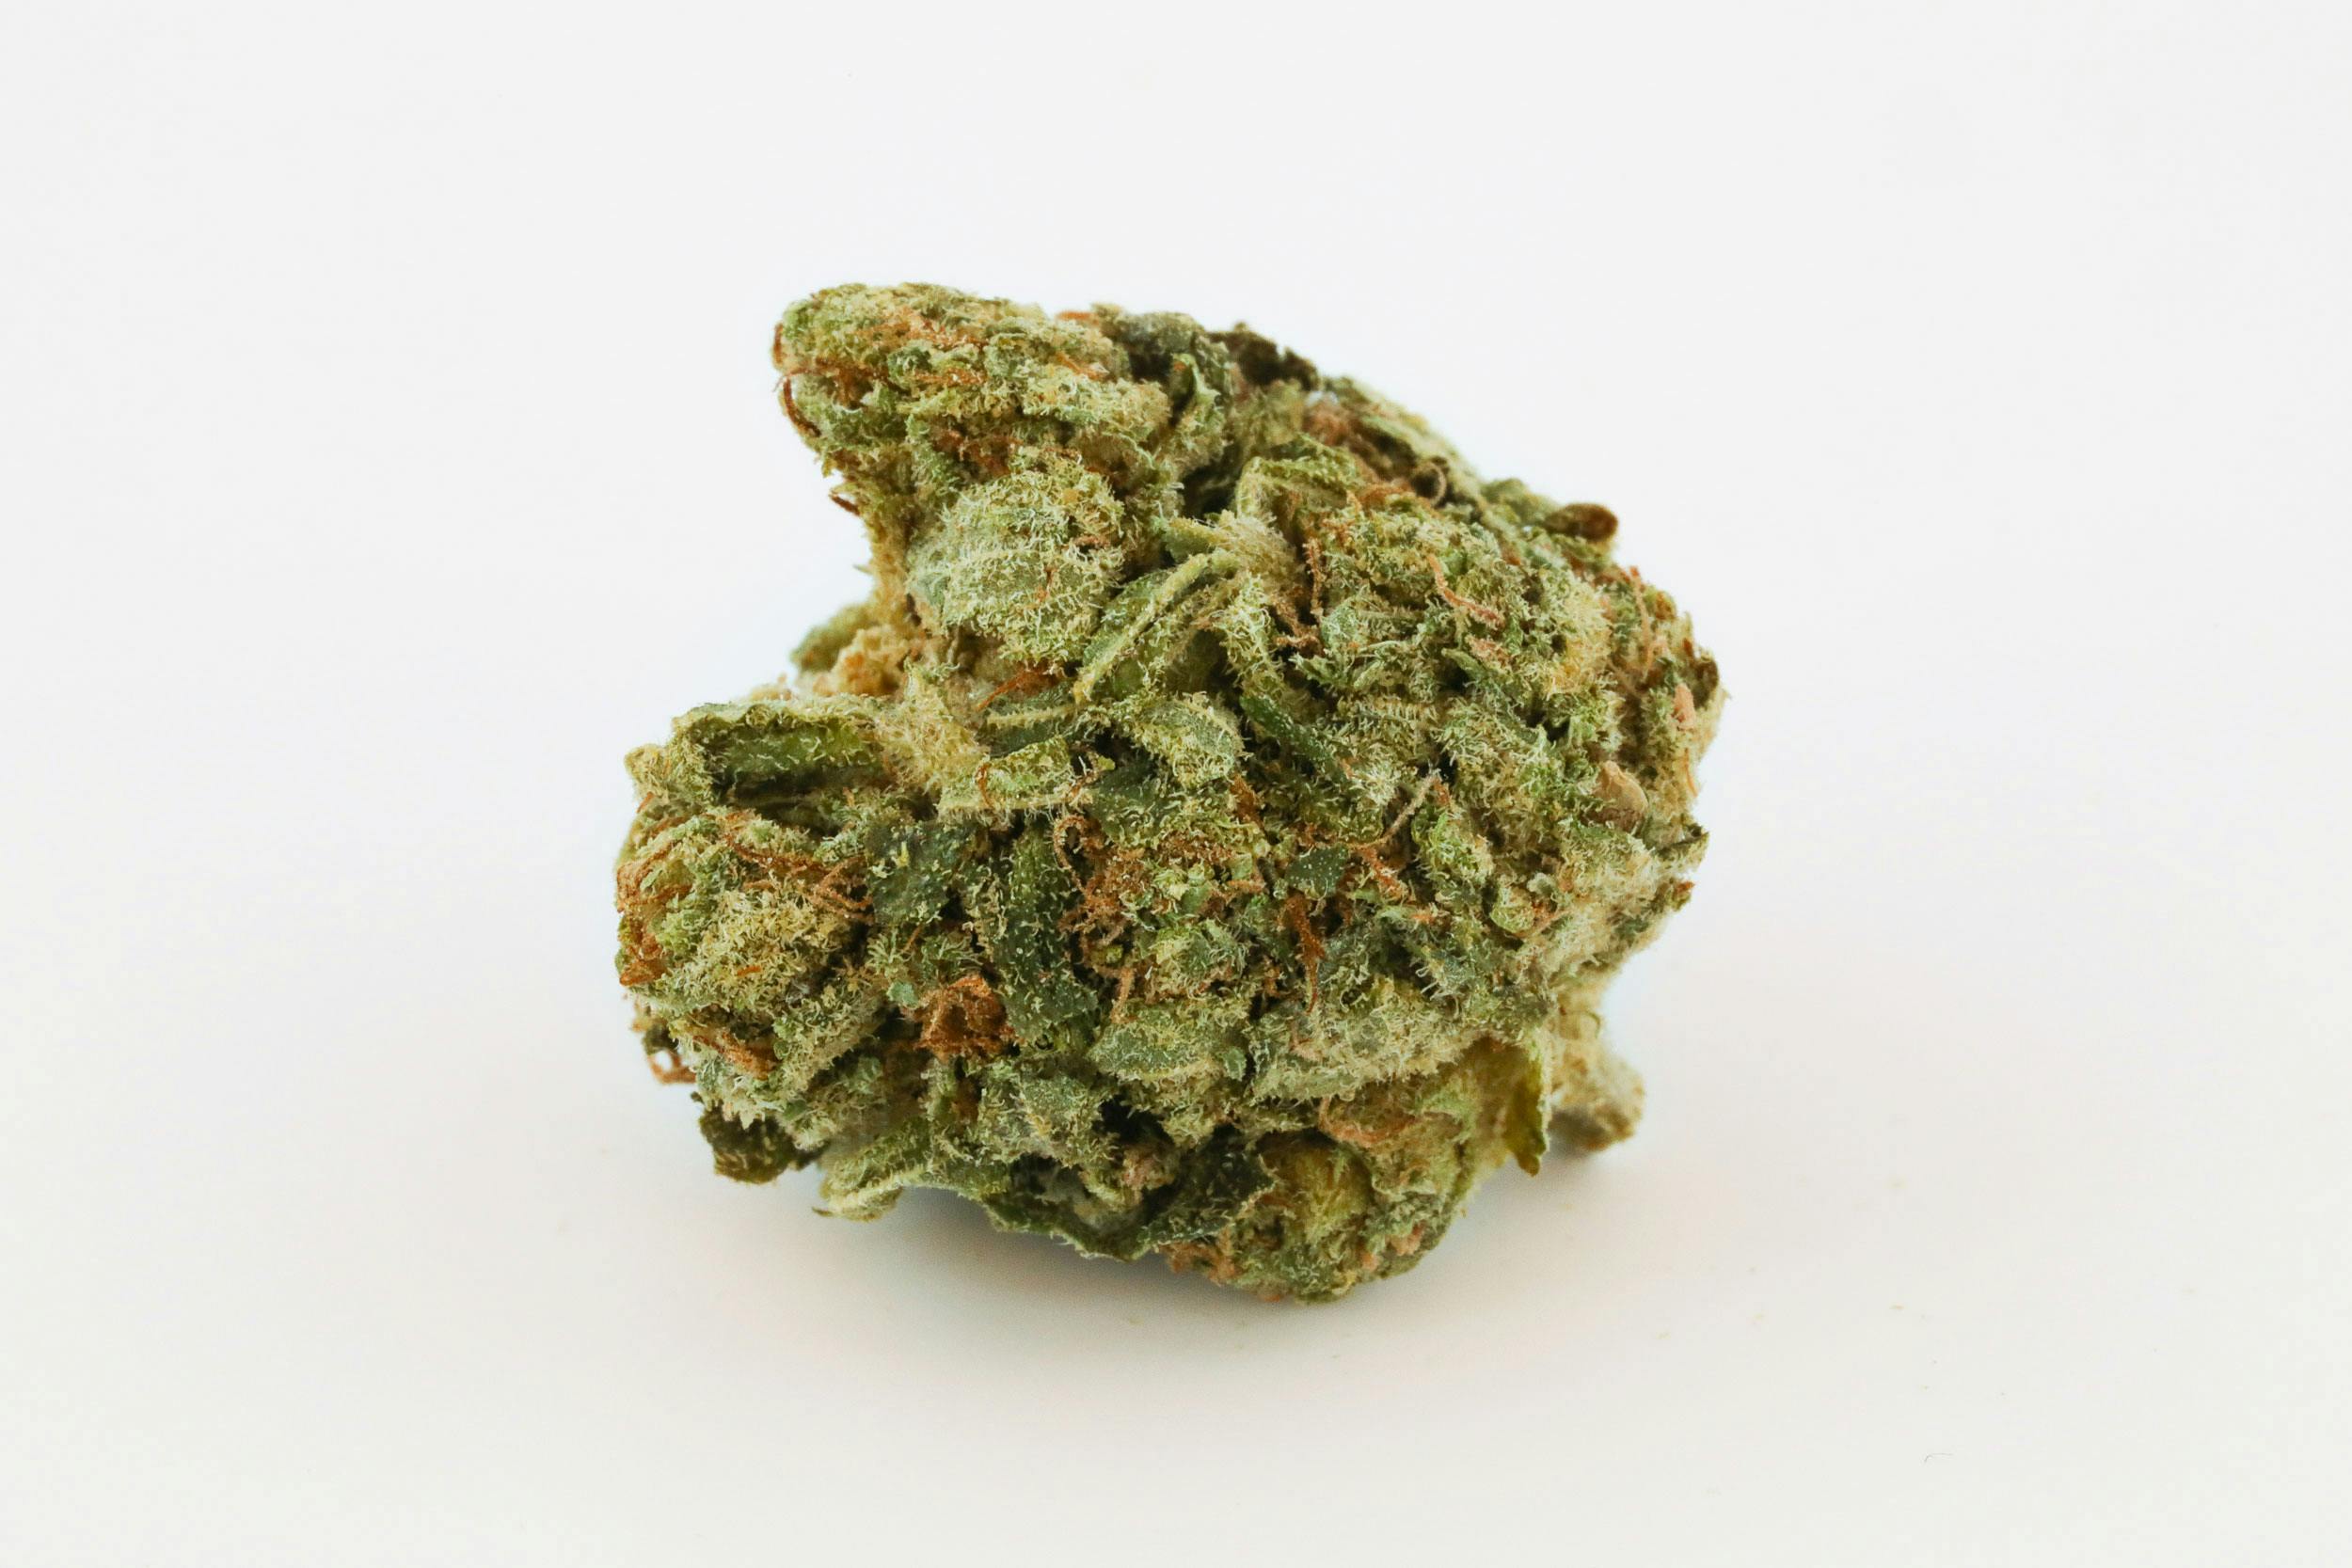 2Best Star Wars Strains To Take You To A Galaxy Far Far Away Best Star Wars Strains To Take You To A Galaxy Far, Far Away